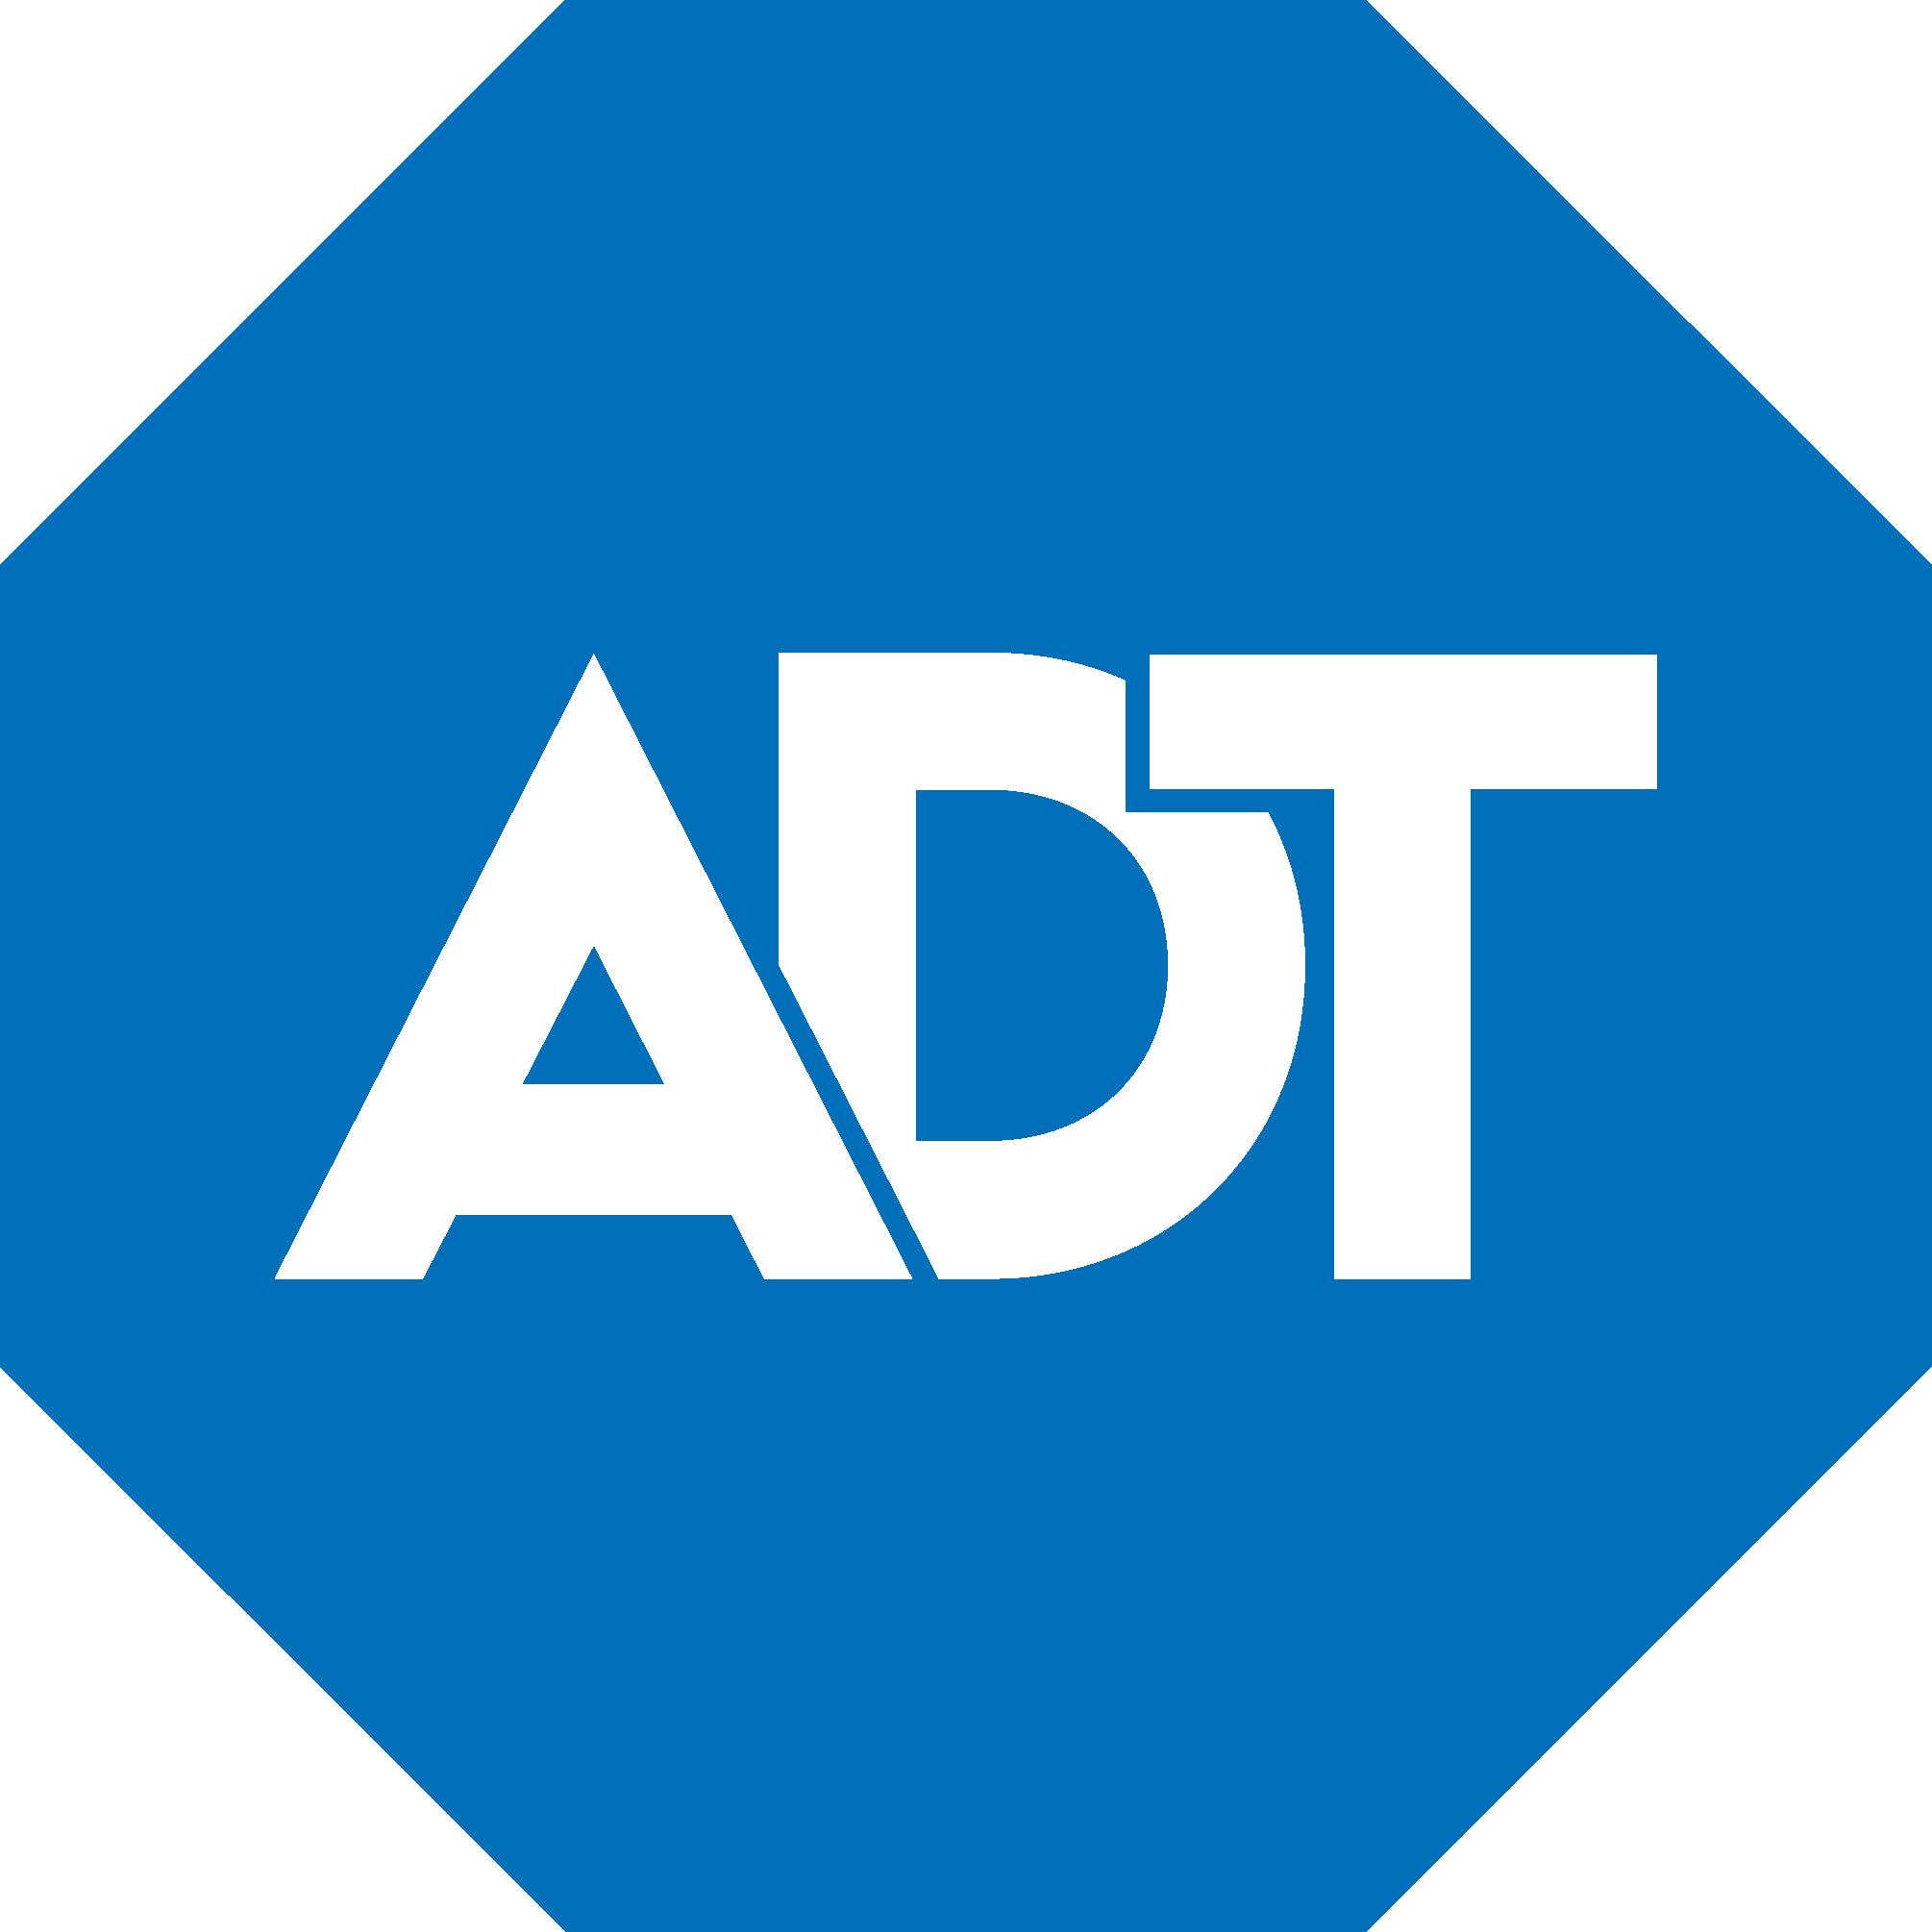 ADT Logo [EPS - Security Systems]